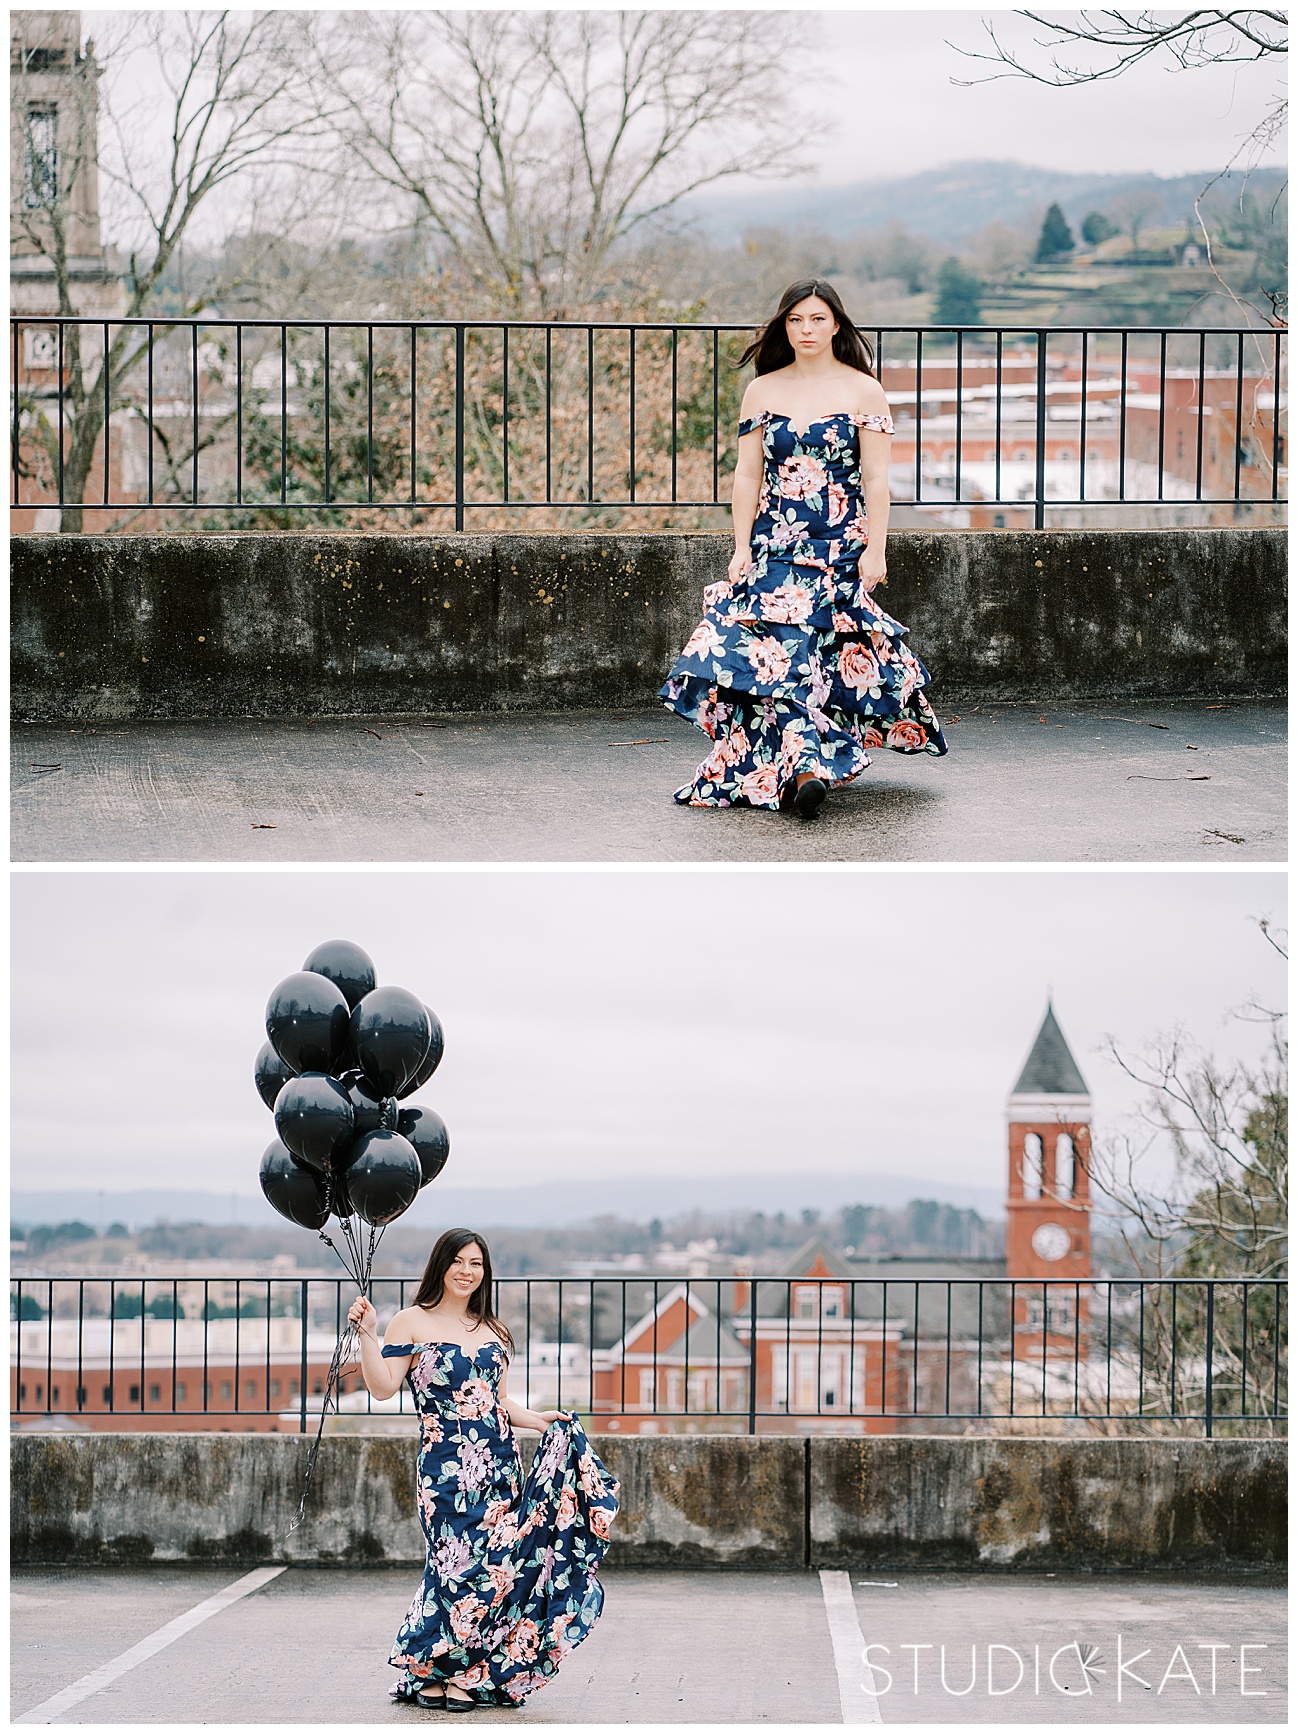 Pepperell High school senior pictures. Clocktower Hill senior pictures in Rome Georgia. Rome georgia senior photographer. Senior pictures with balloons.